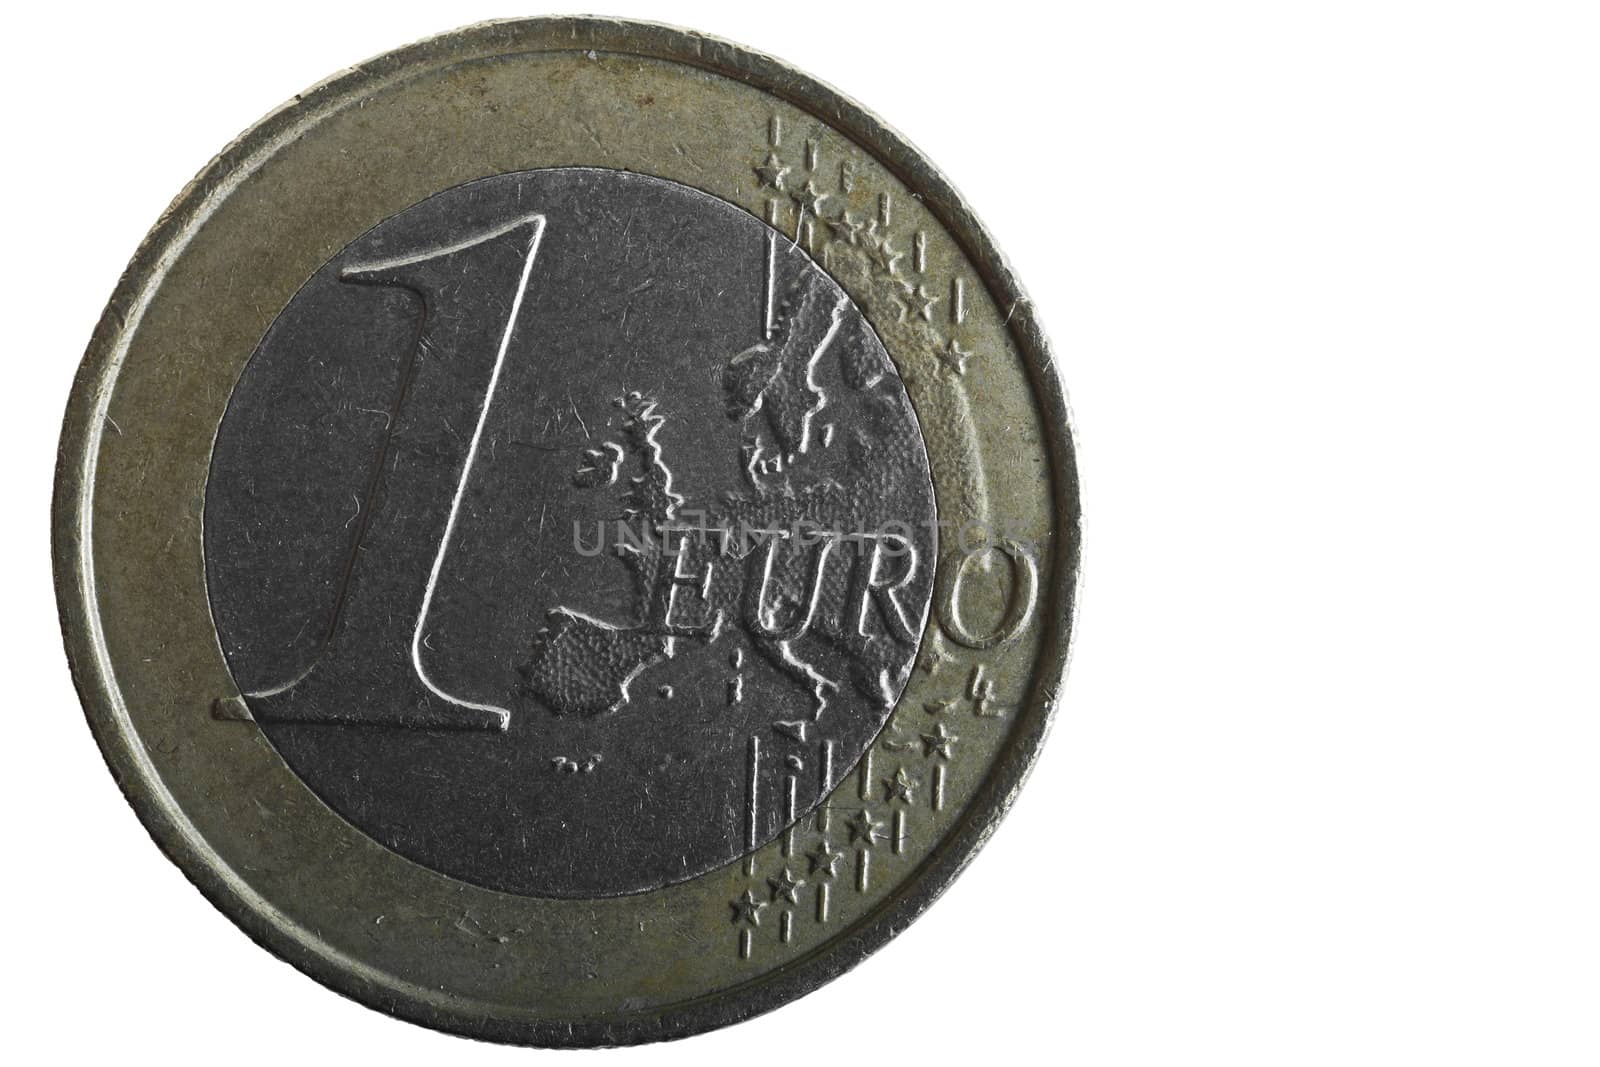 1 Euro Coin Macro by PhotoWorks